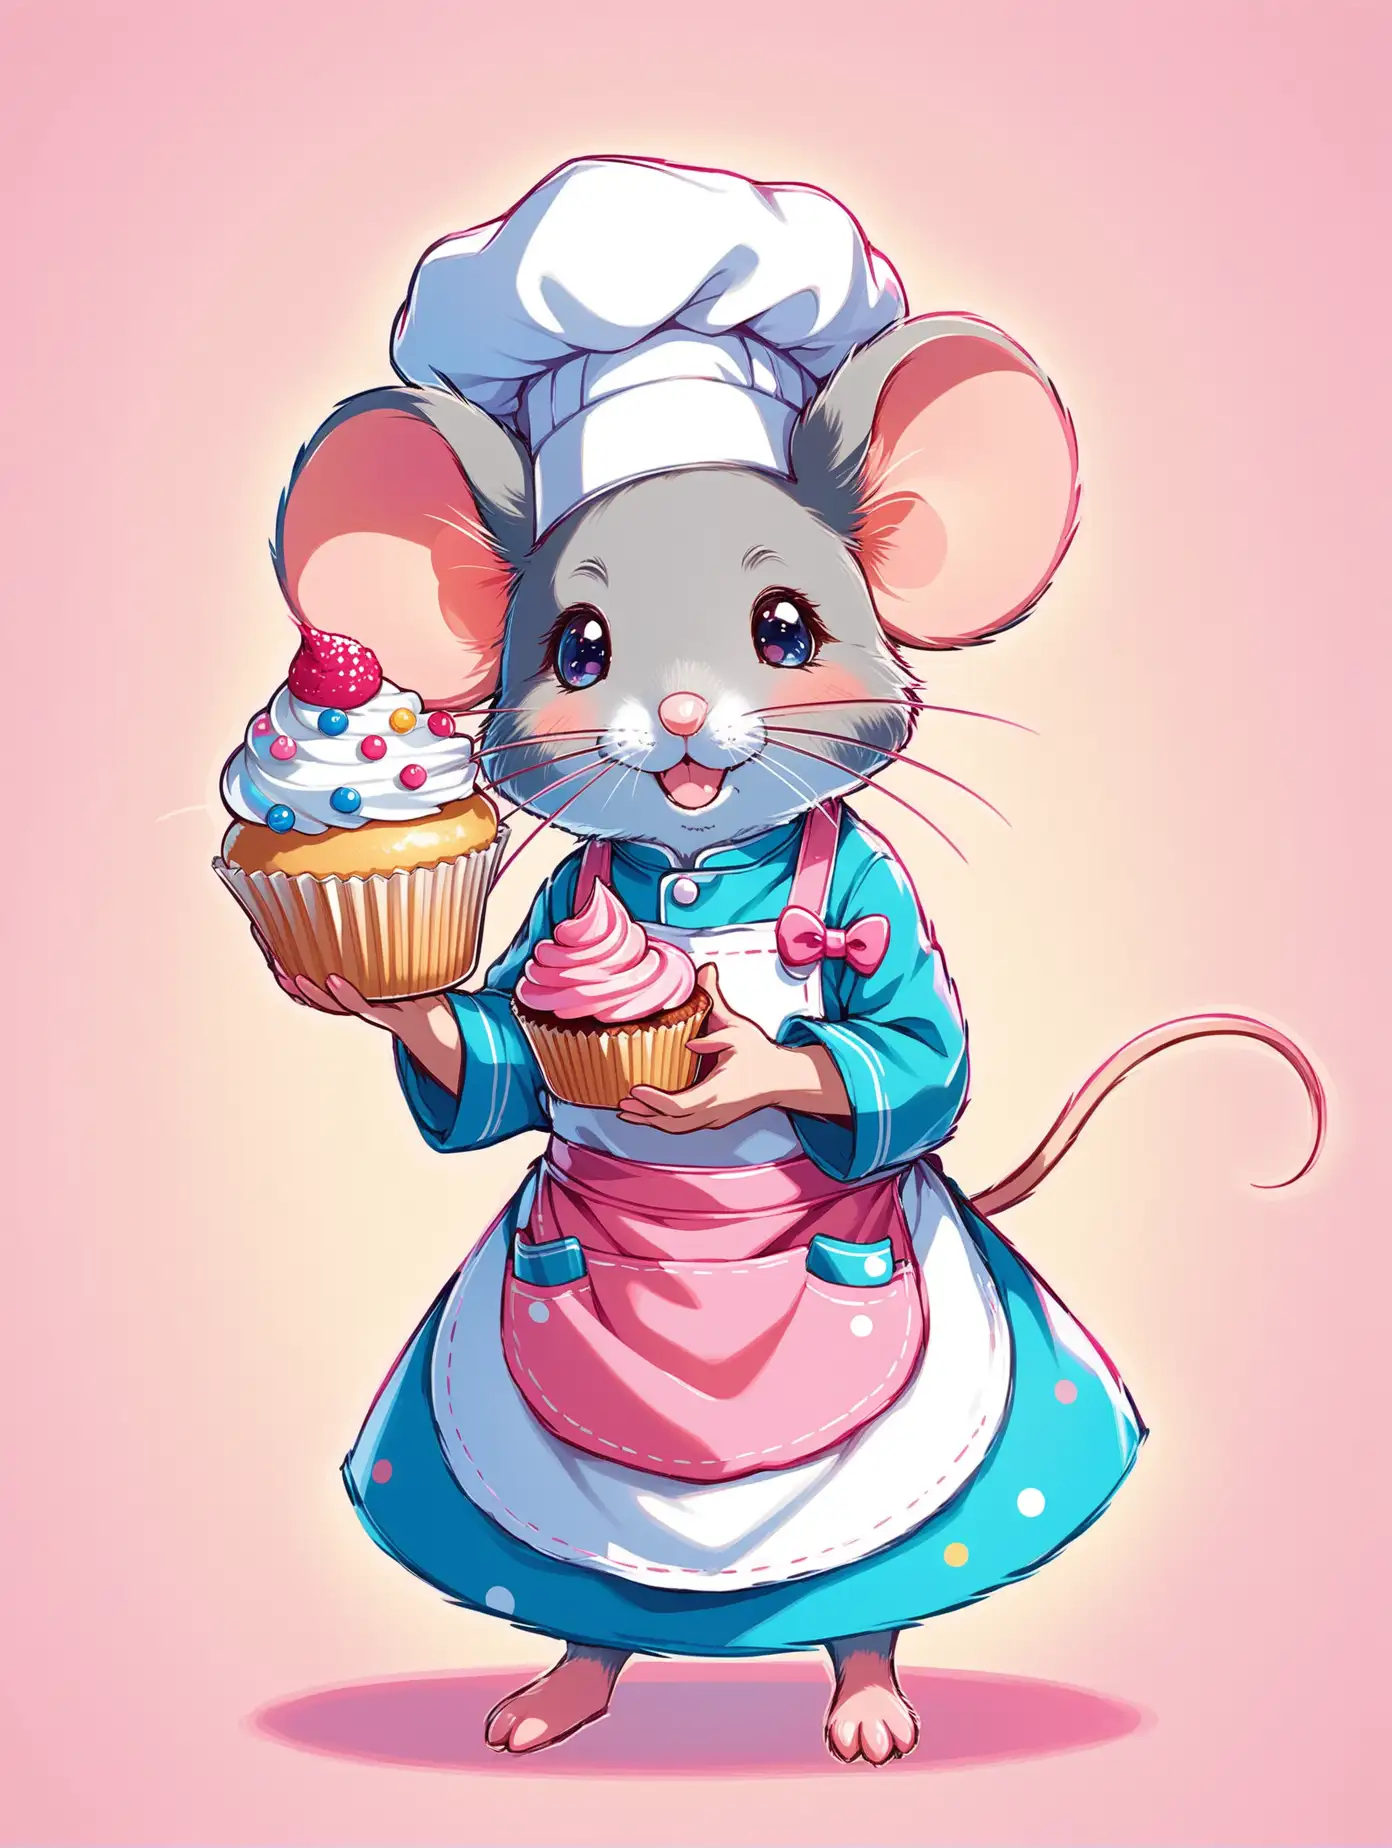 A super cute mouse wearing an apron and a chefs hat, holding a cupcake, colourful pinks and blues